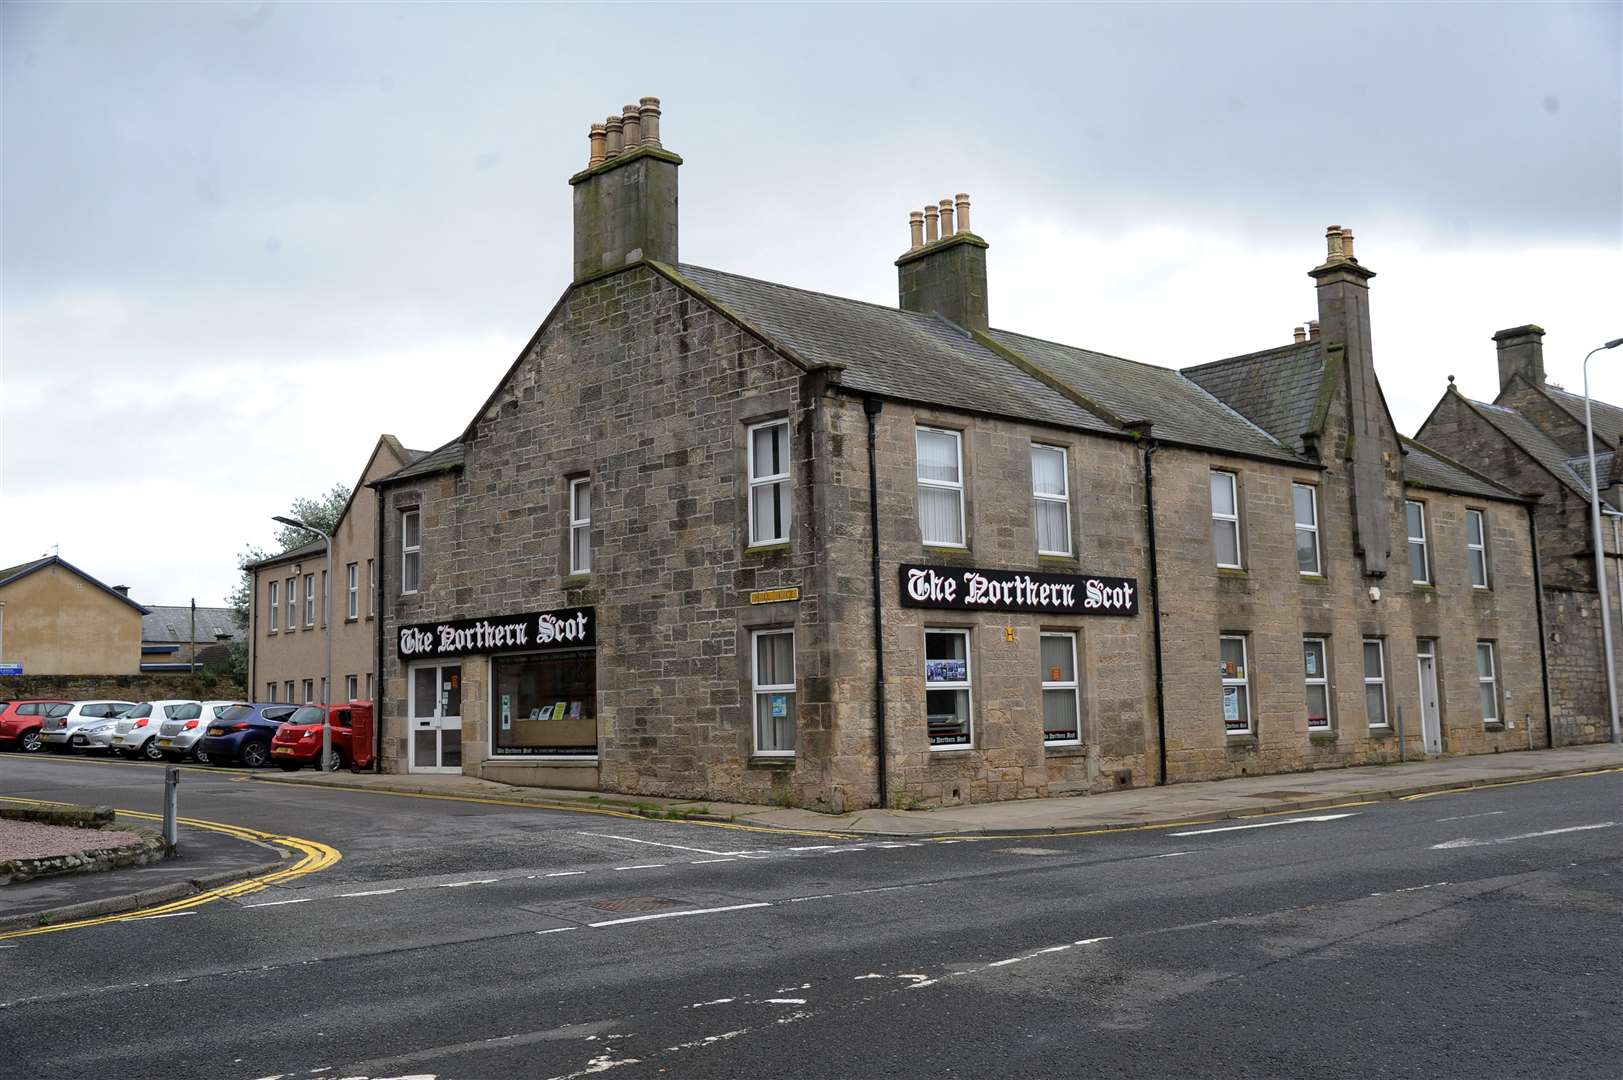 The South Street office has been home to The Northern Scot for more than a decade.